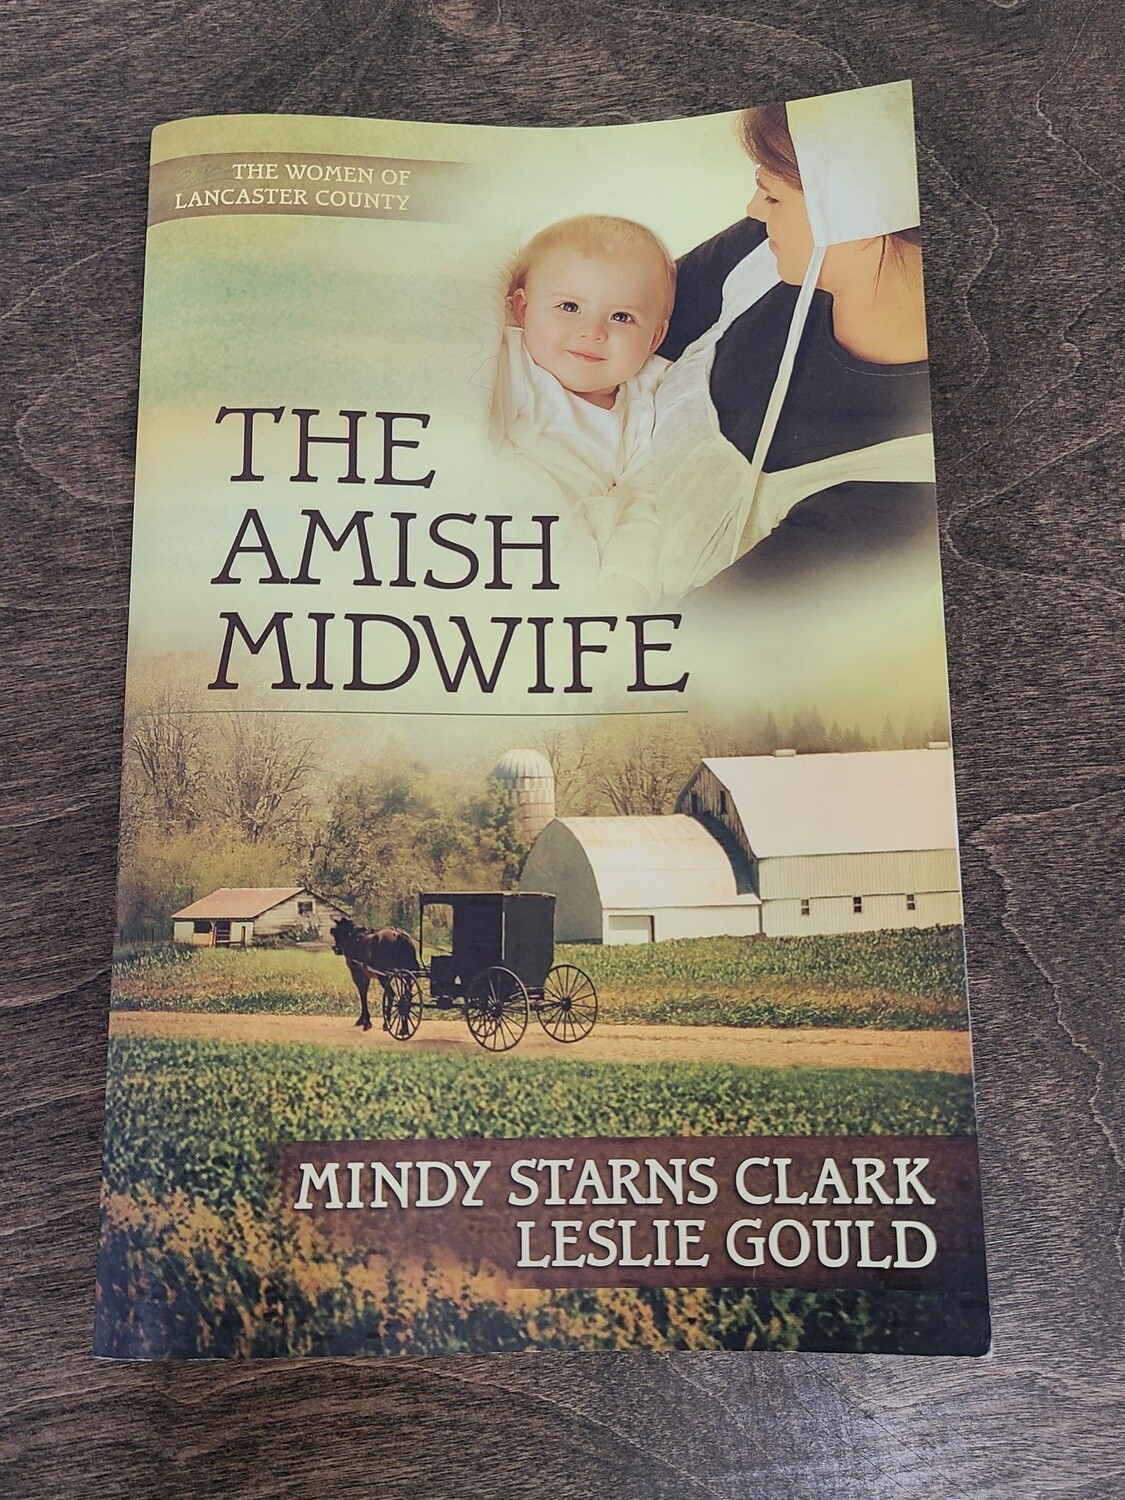 The Amish Midwife by Mindy Starns Clark and Leslie Gould